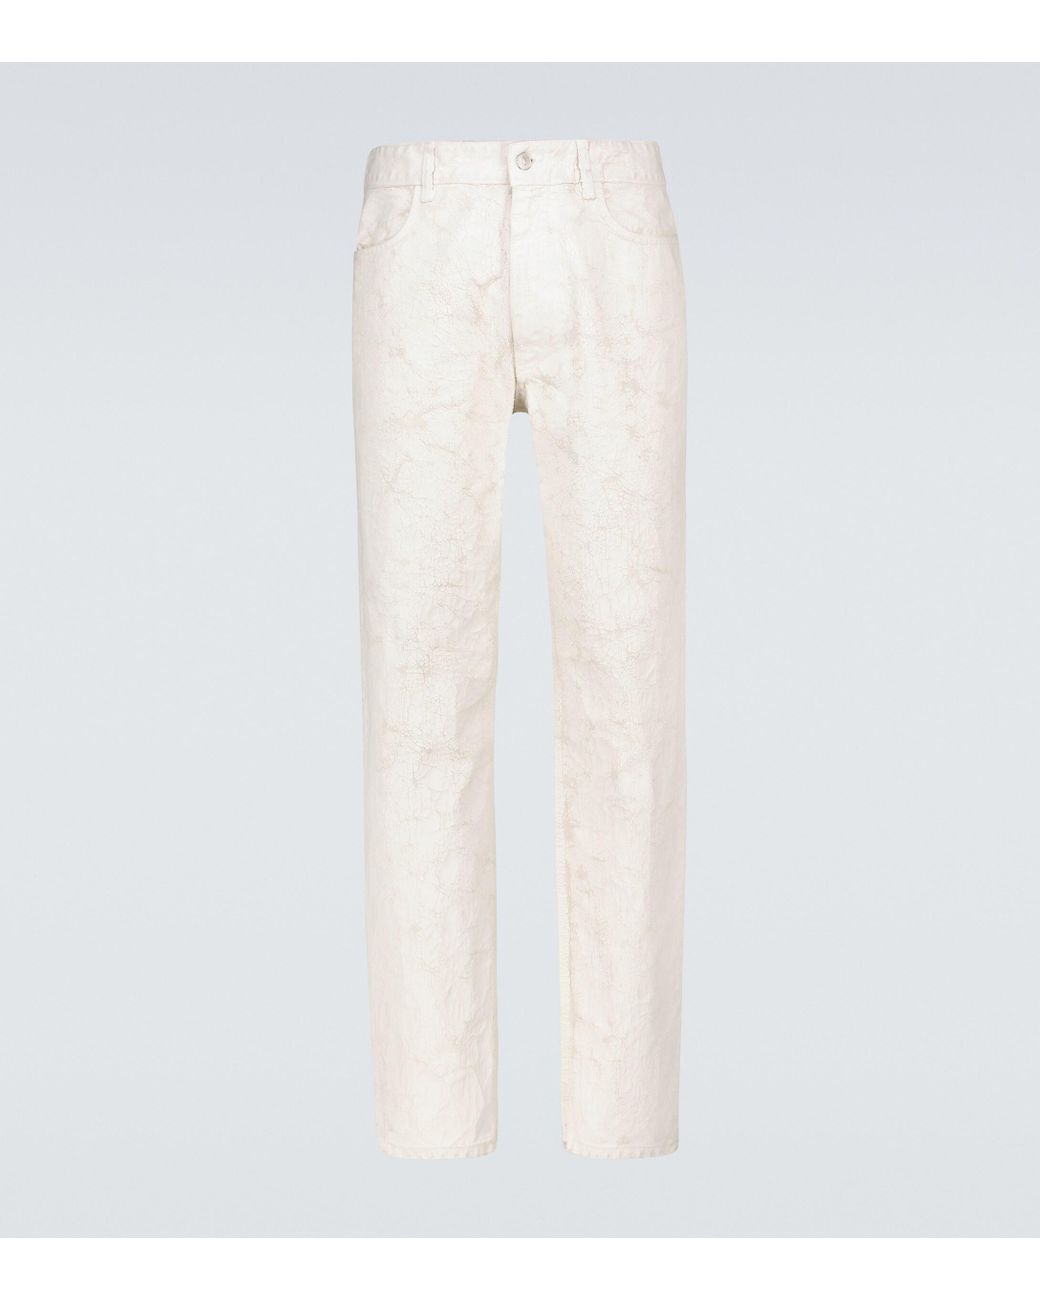 Givenchy Crackled Painted Jeans in White for Men | Lyst